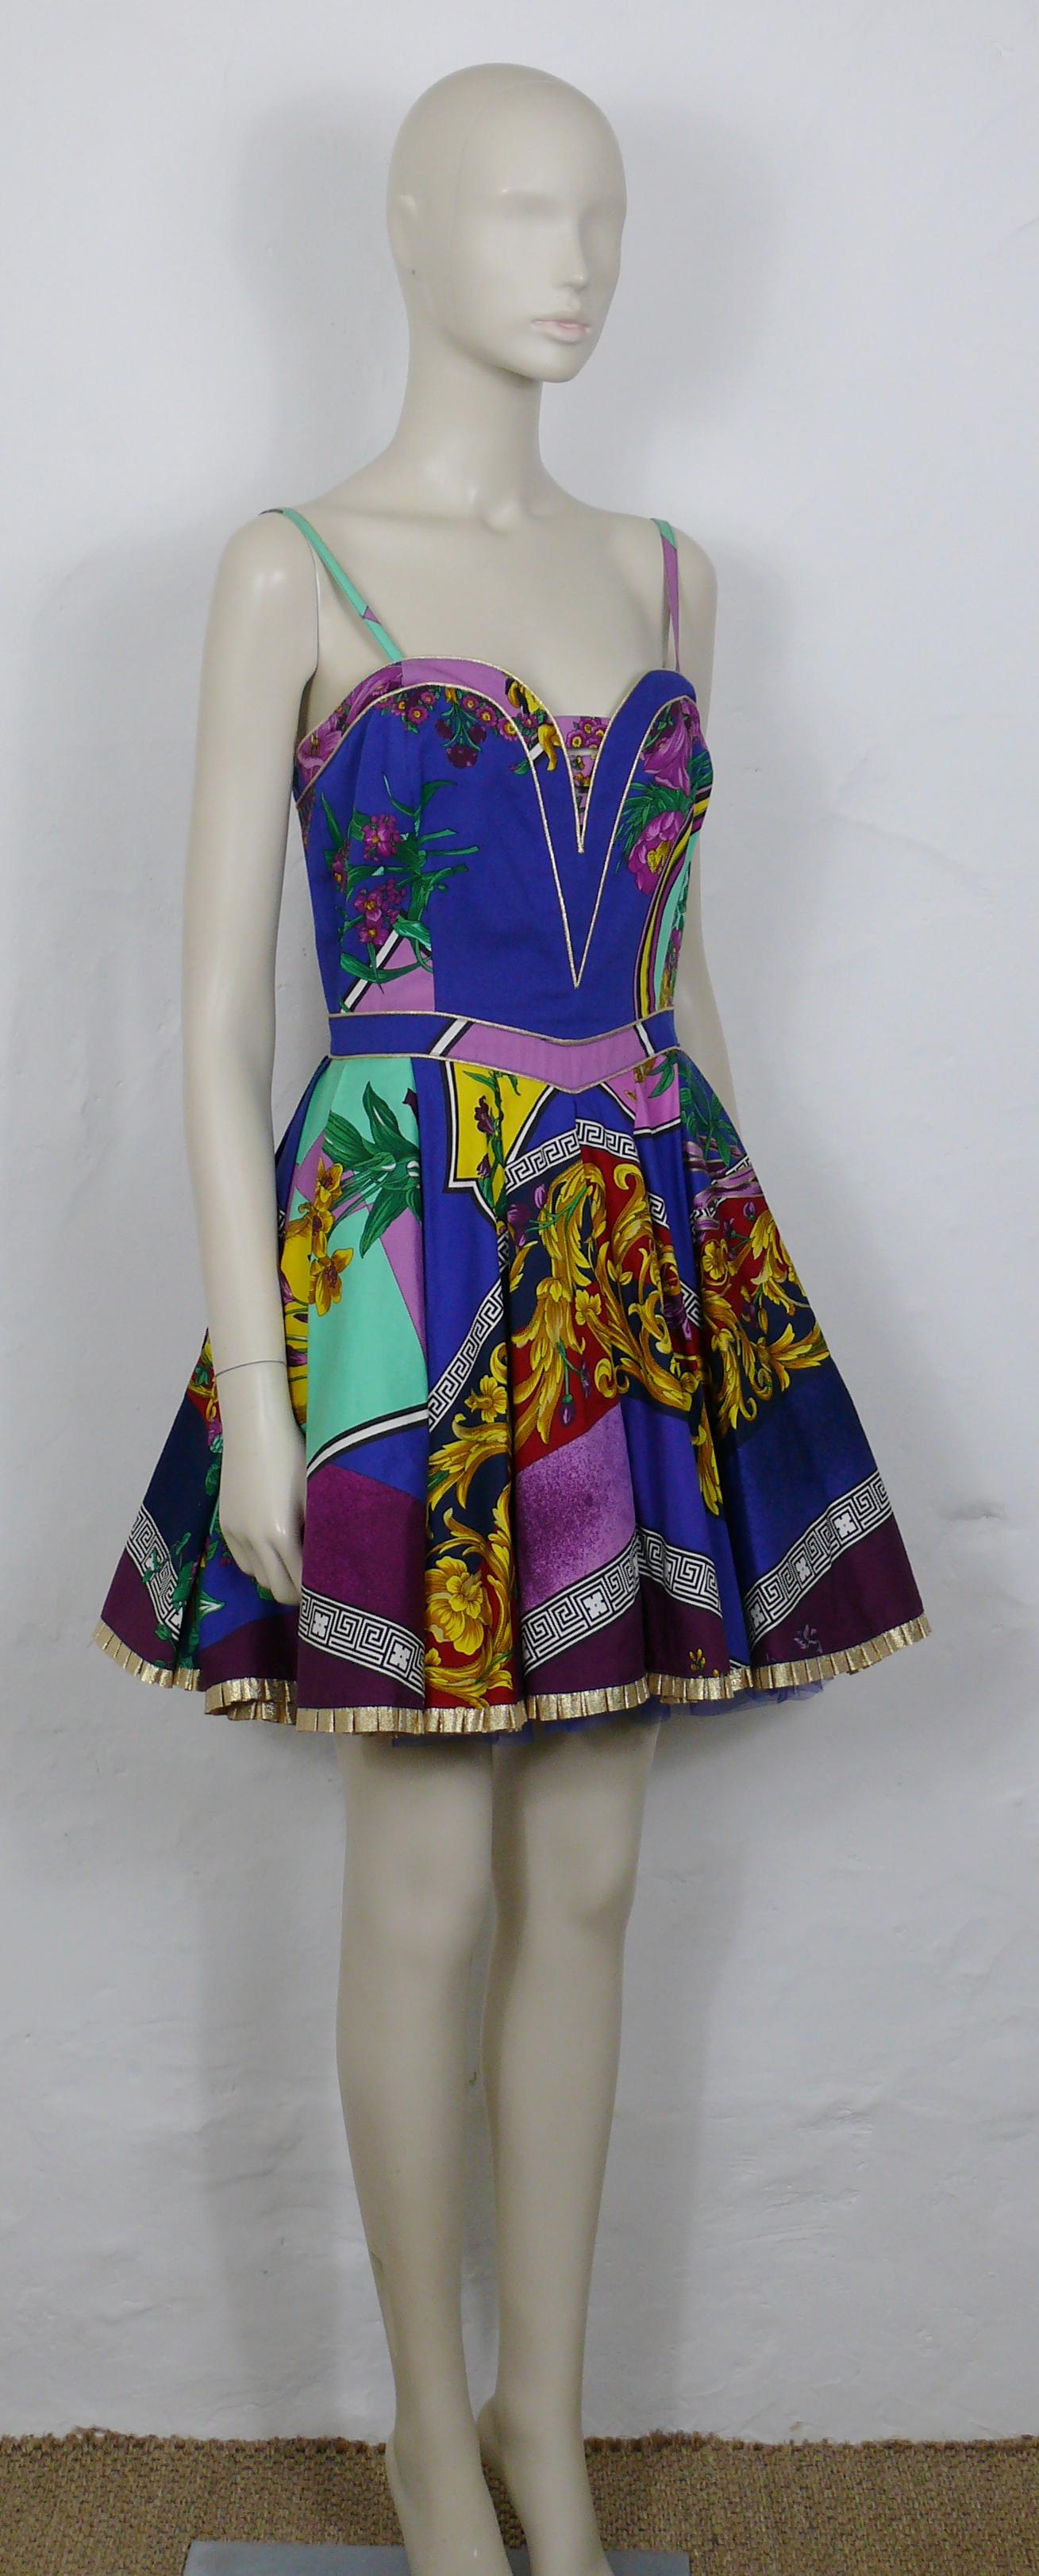 VERSACE JEANS COUTURE 1990s opulent multicolored barocco print dress from GIANNI VERSACE era.

This dress features : 
- Opulent multicolored Barocco print with flowers, acanthus leaves, putti, black & white Greek friezes.
- Electric blue tulle